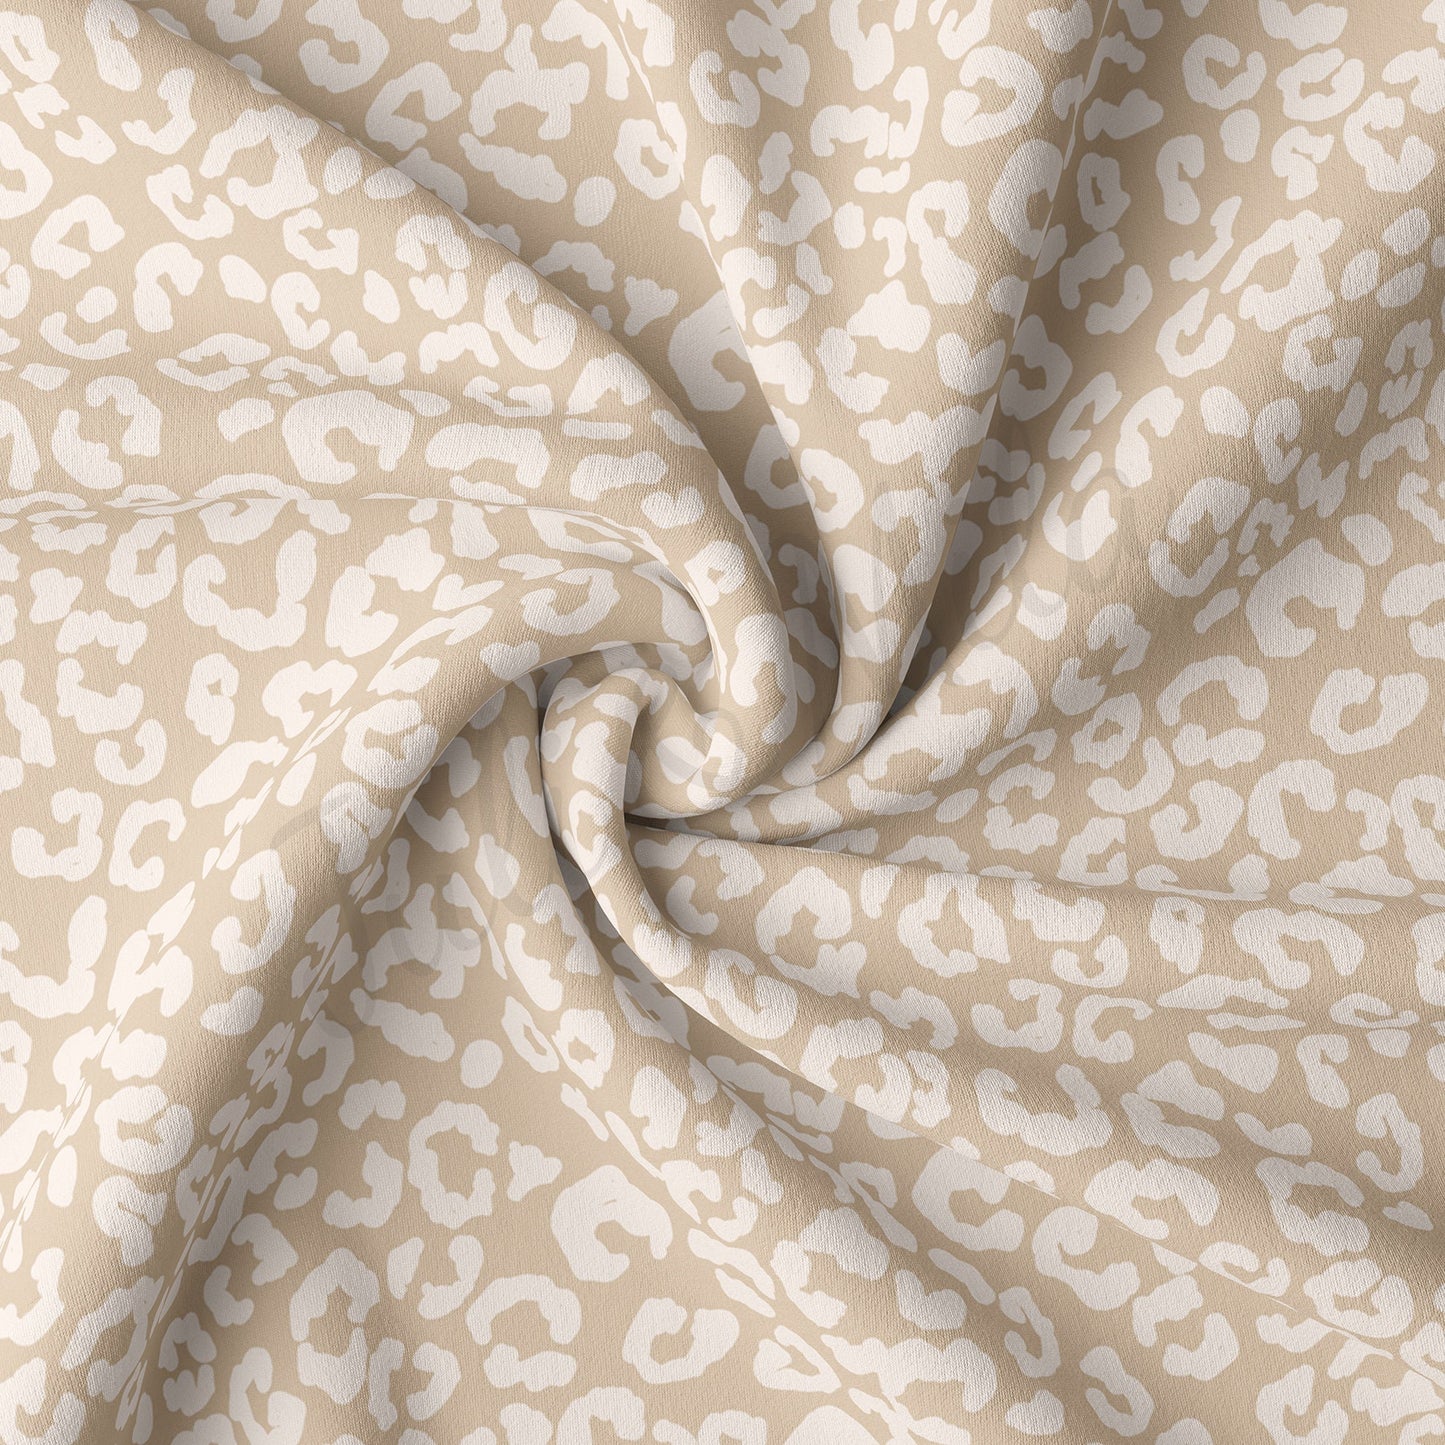 DBP Fabric Double Brushed Polyester DBP385